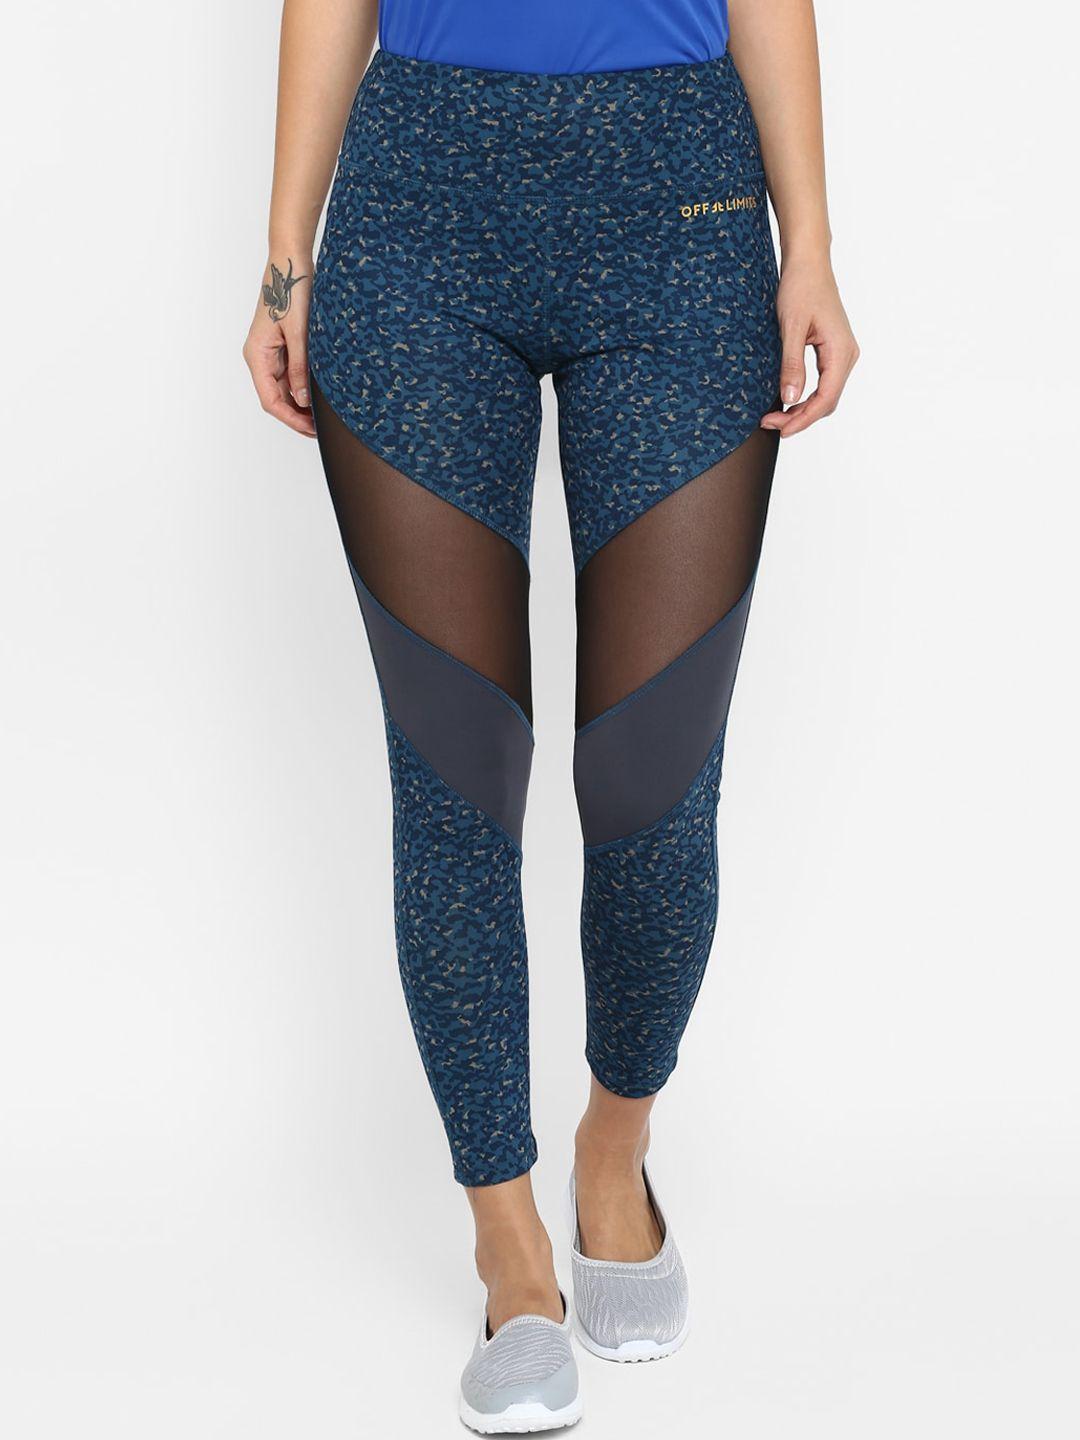 off limits women olive green & blue printed mesh tights